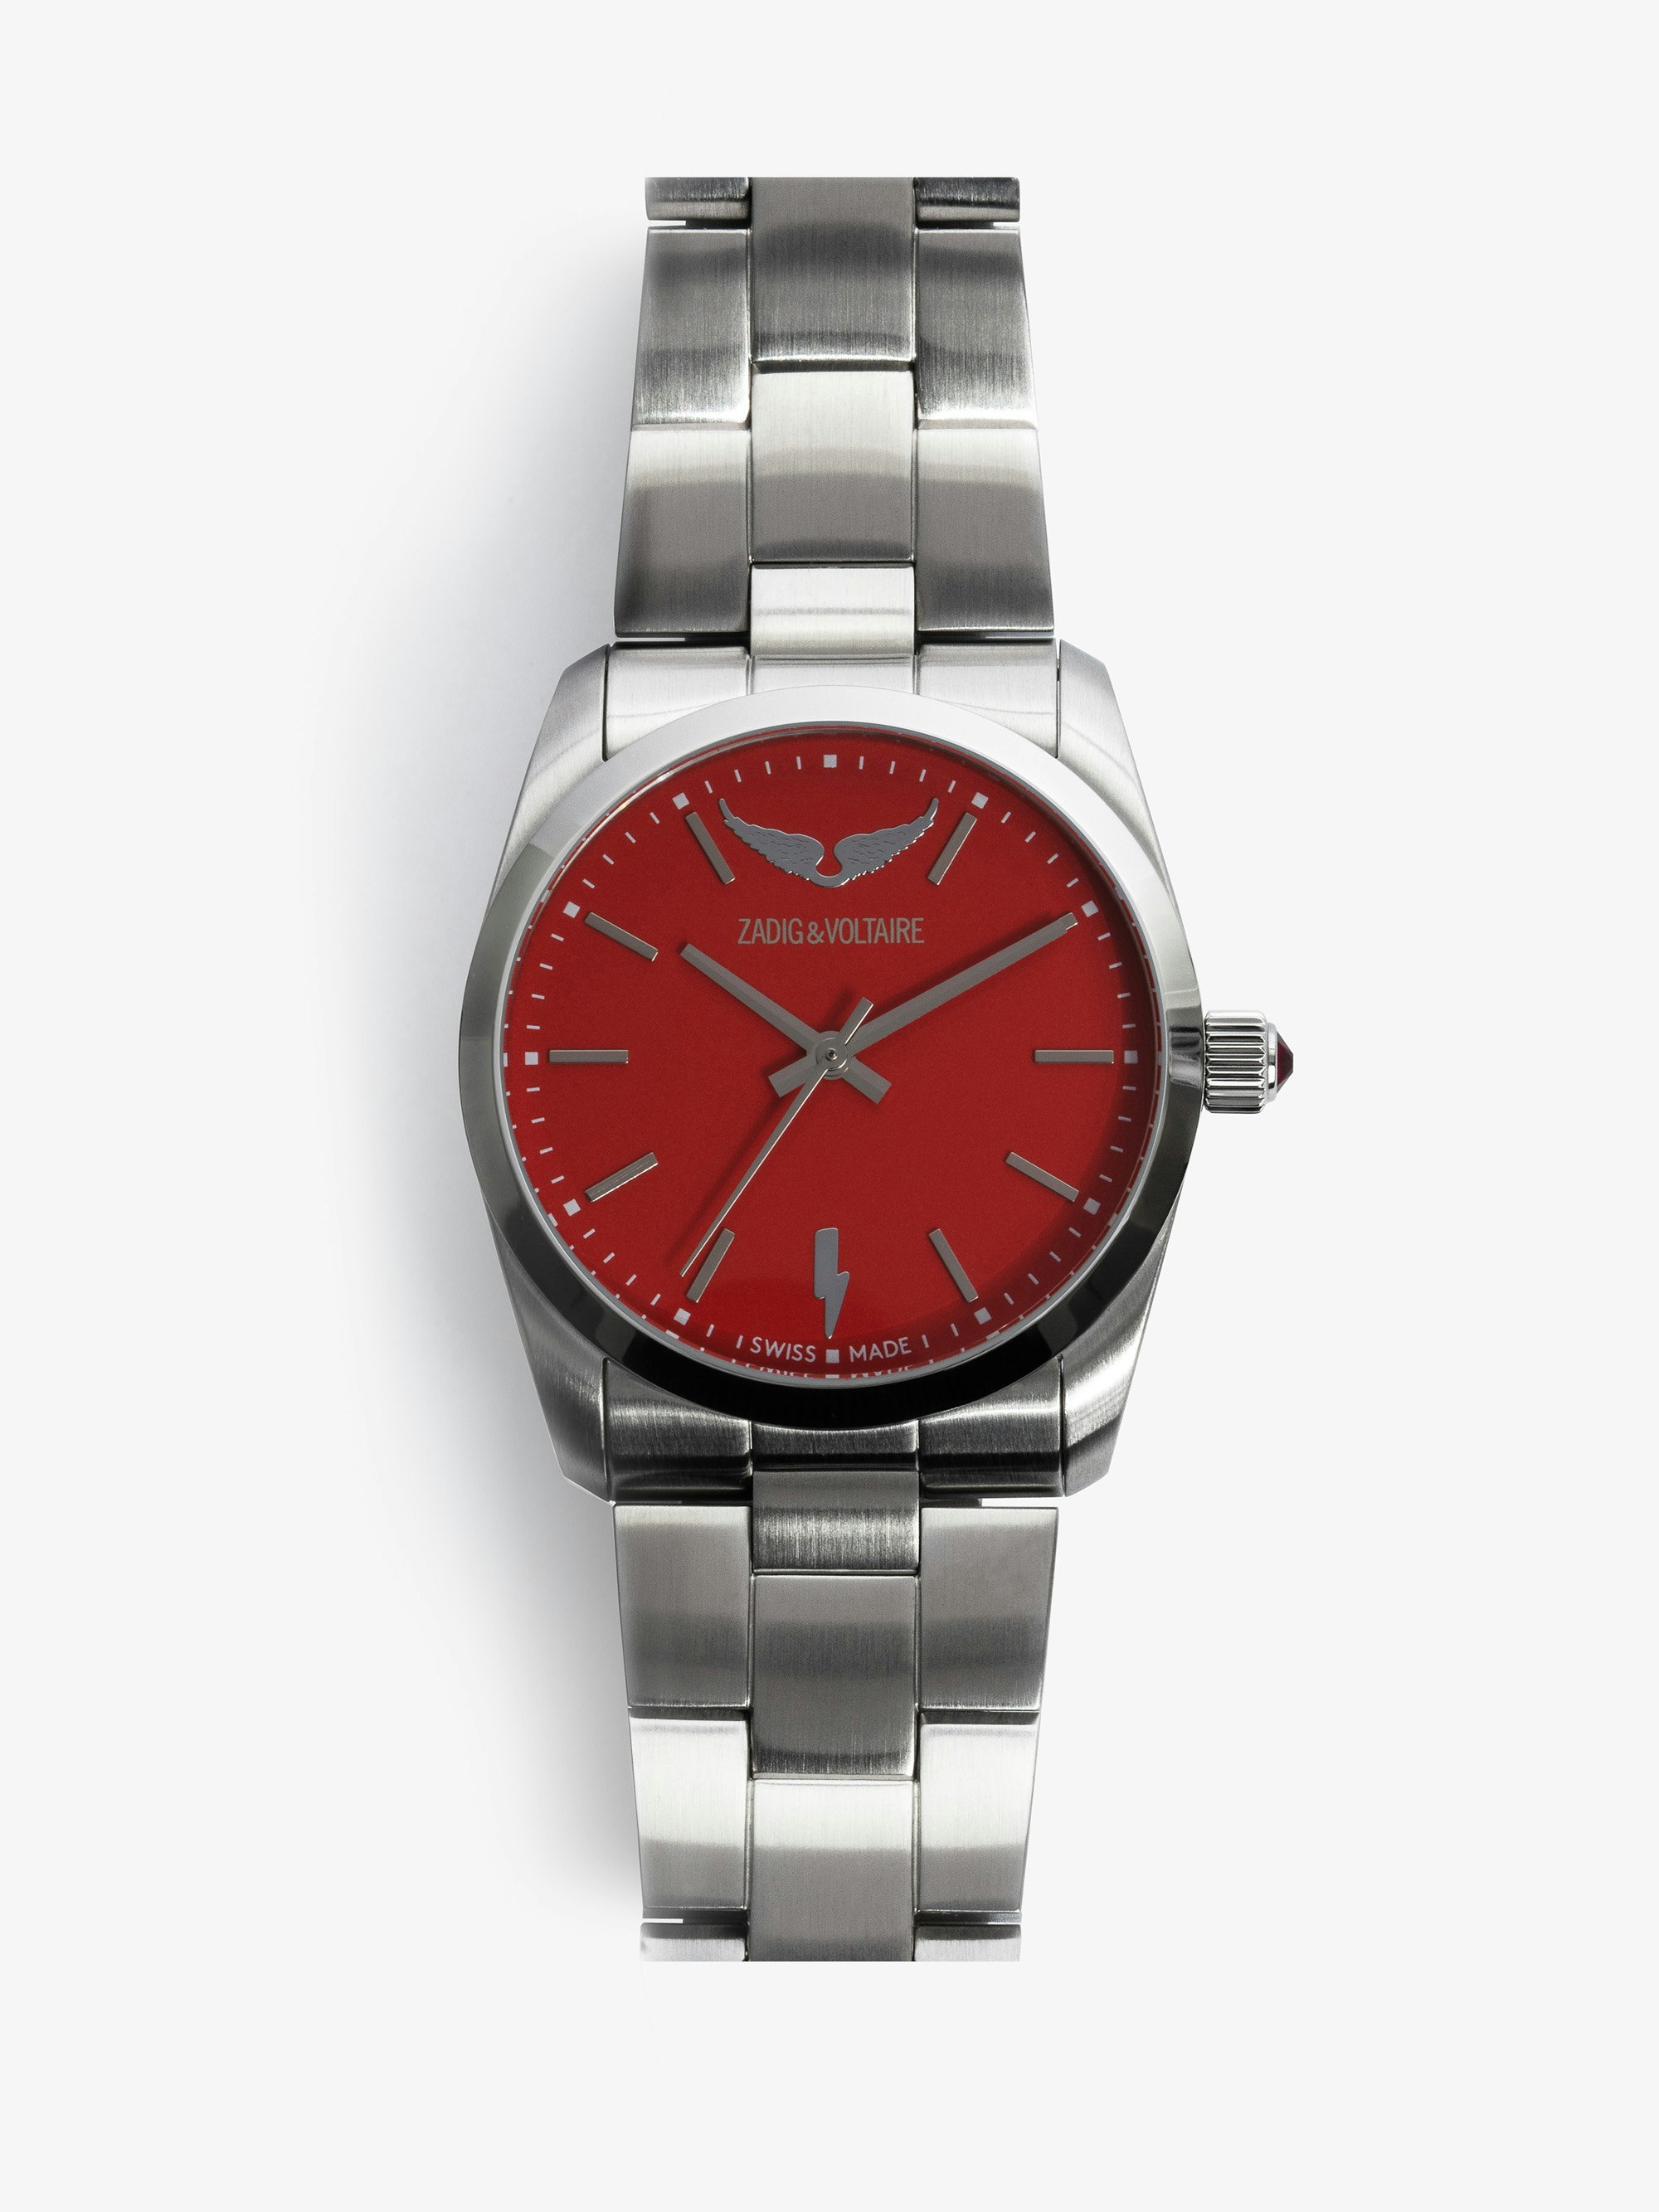 Time2Love Watch - Women's stainless steel watch with matte red face